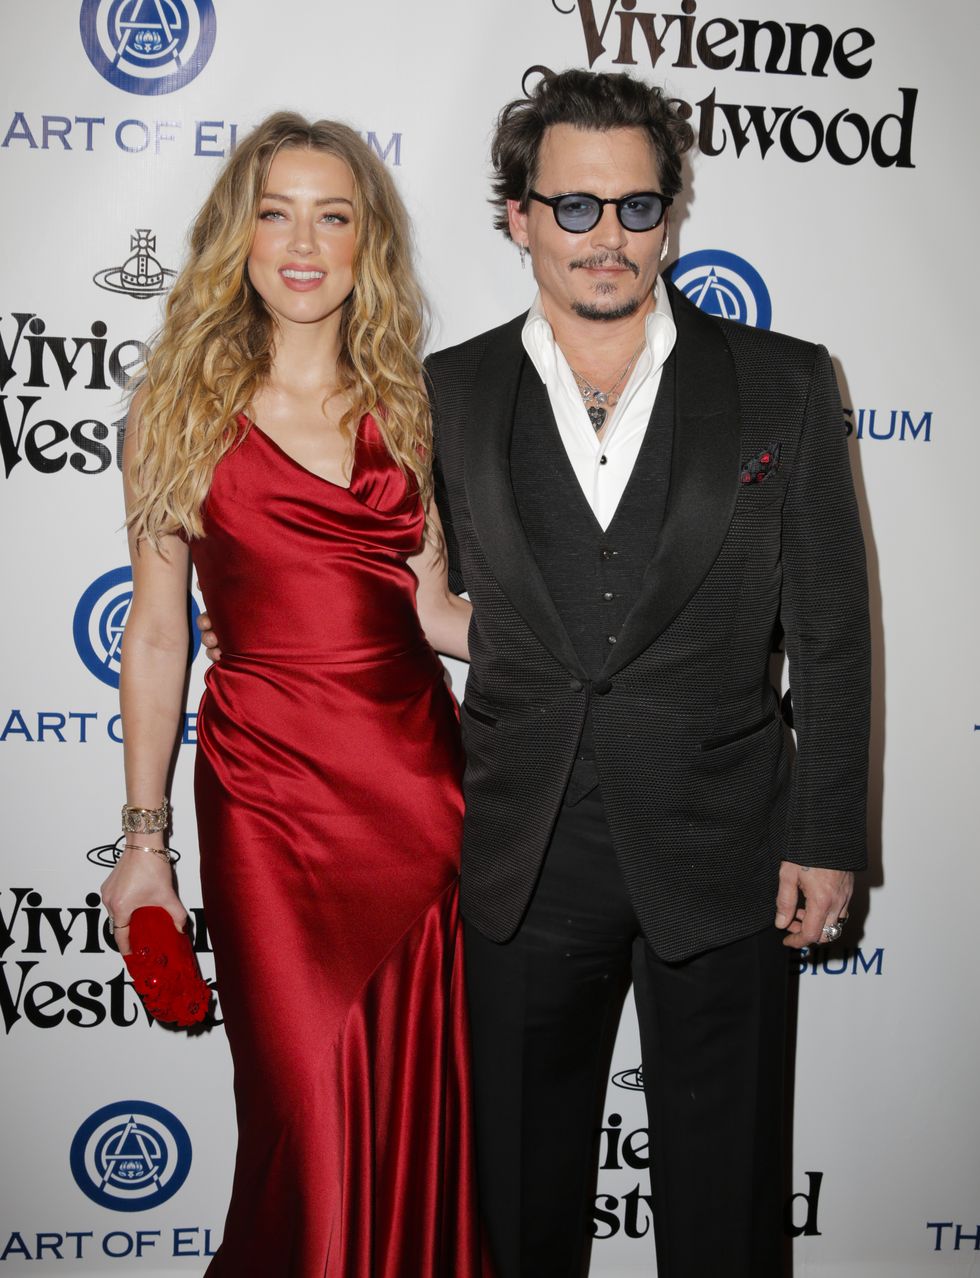 culver city, ca january 09 actors amber heard l and johnny depp attend the art of elysium 2016 heaven gala presented by vivienne westwood andreas kronthaler at 3labs on january 9, 2016 in culver city, california photo by alison buckgetty images